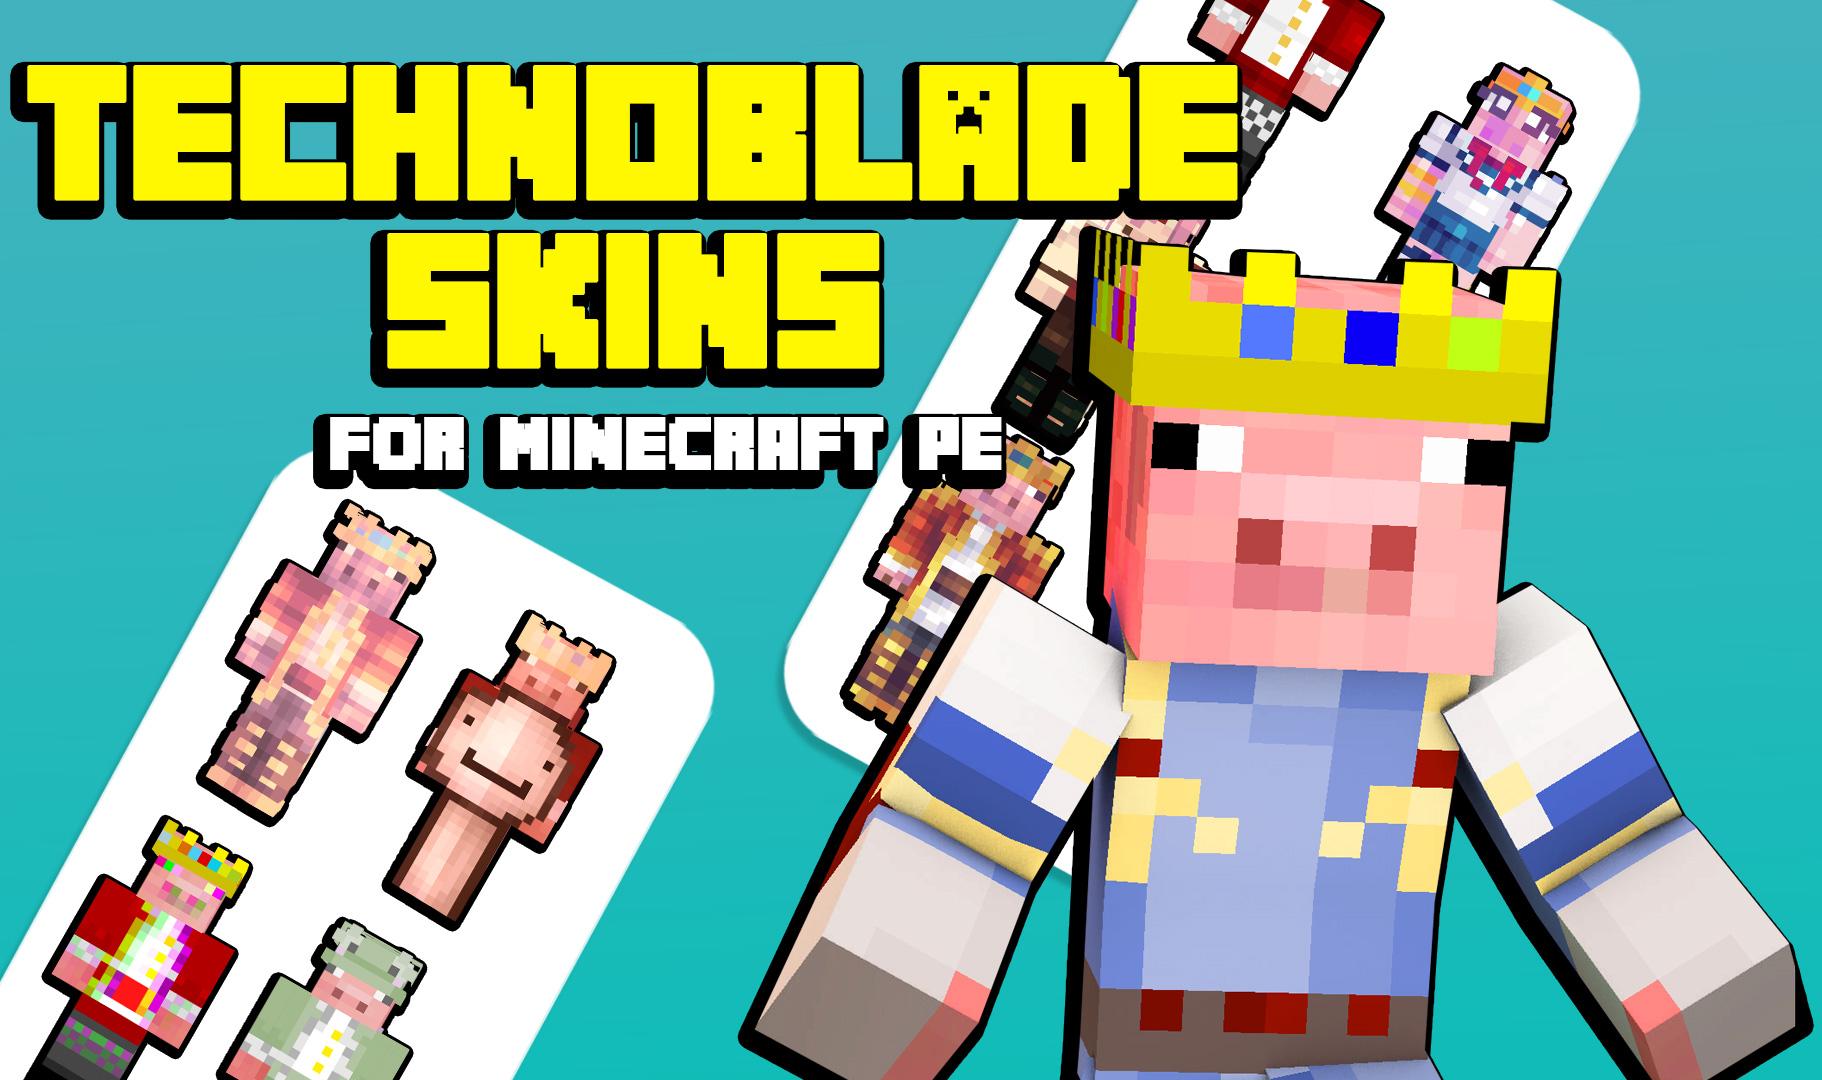 How to download and use the Technoblade skin in Minecraft